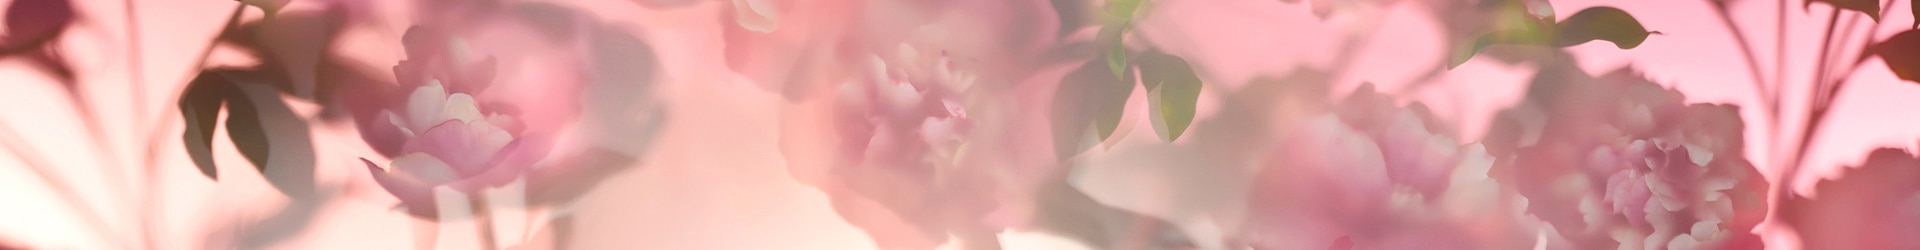 image of peonies, an ingredient in Jo Malone London peony & blush suede, on a pink background